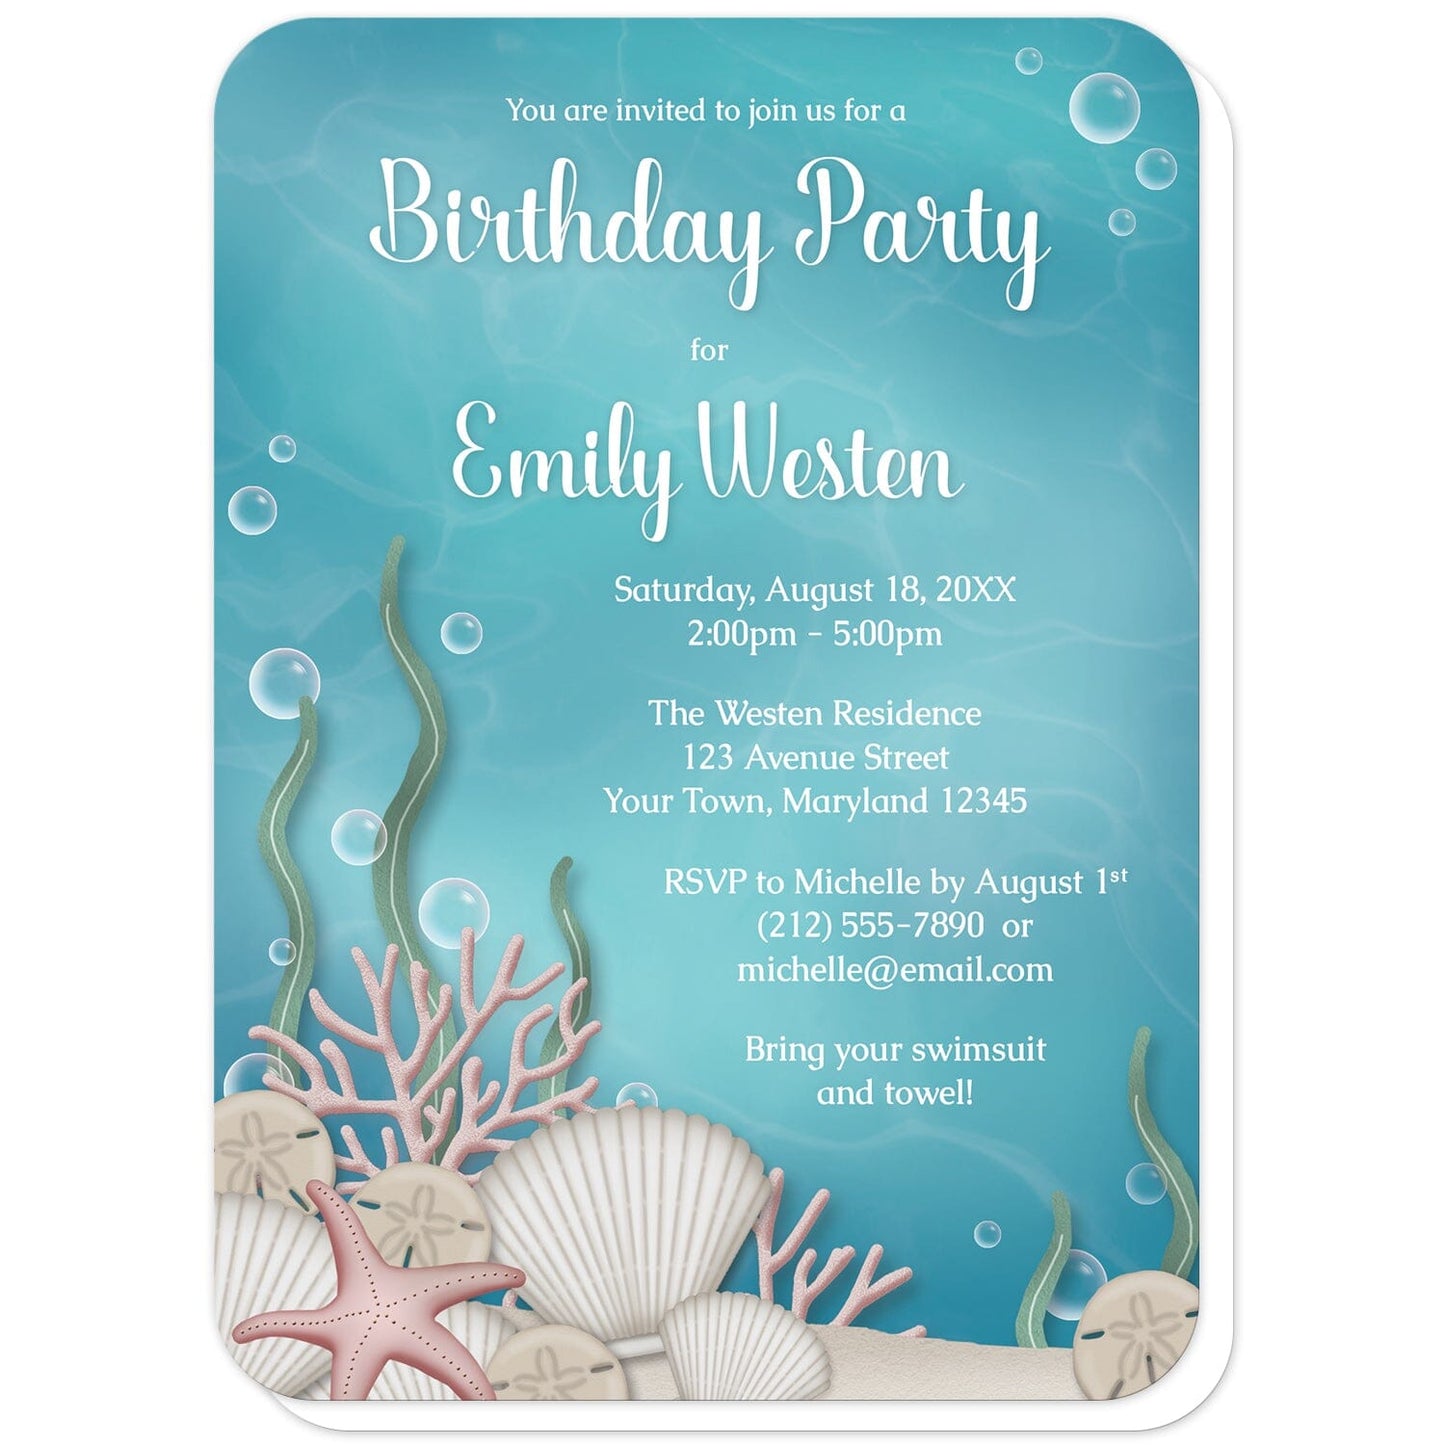 Whimsical Under the Sea Birthday Party Invitations (with rounded corners) at Artistically Invited. Beautifully illustrated whimsical under the sea birthday party invitations with an under the sea or aquarium theme. They are designed with a sandy seabed, assorted seashells, bubbles, coral, and kelp with an underwater aqua blue water background. Your personalized birthday party details are custom printed in white over the water background.